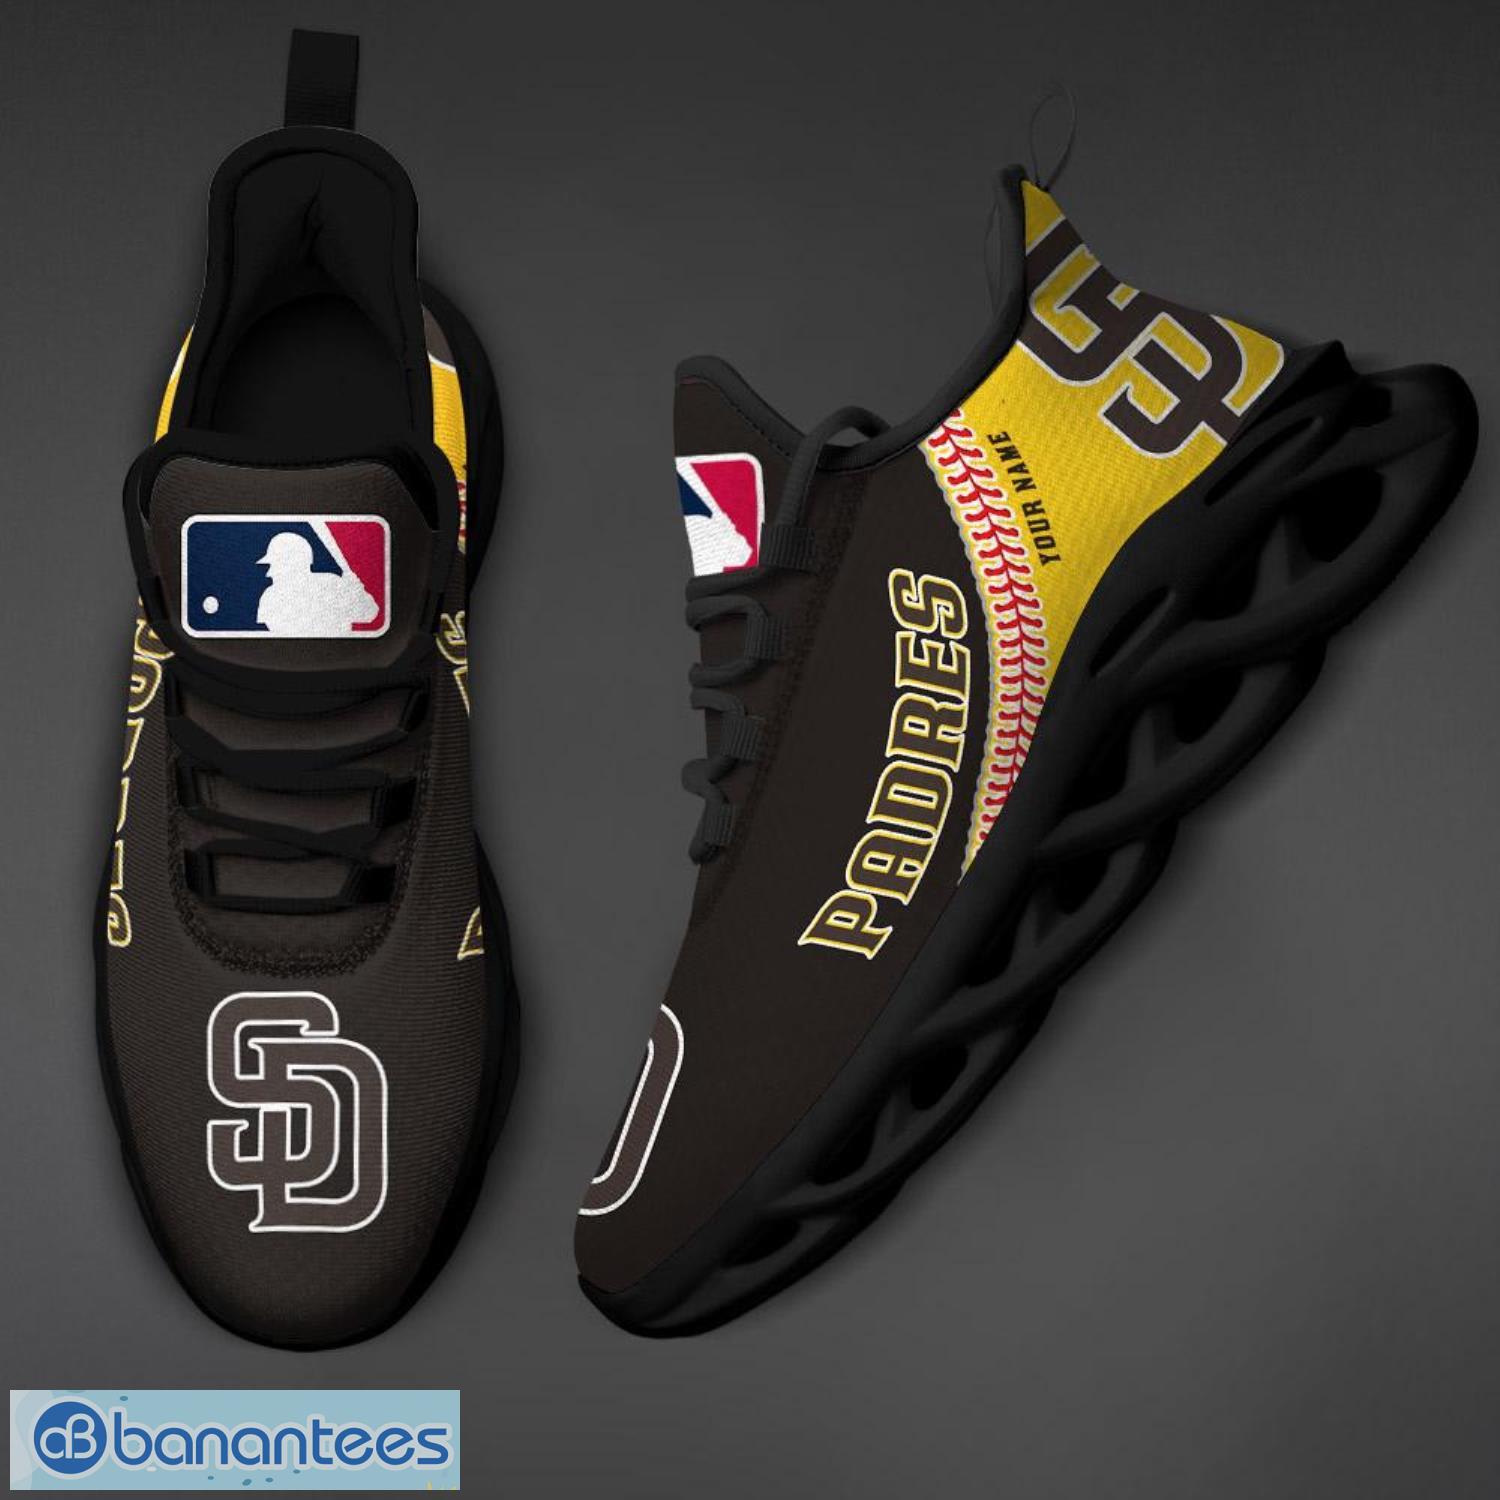 San Diego Padres Custom Name Max Soul Sneaker Running Shoes For Fans